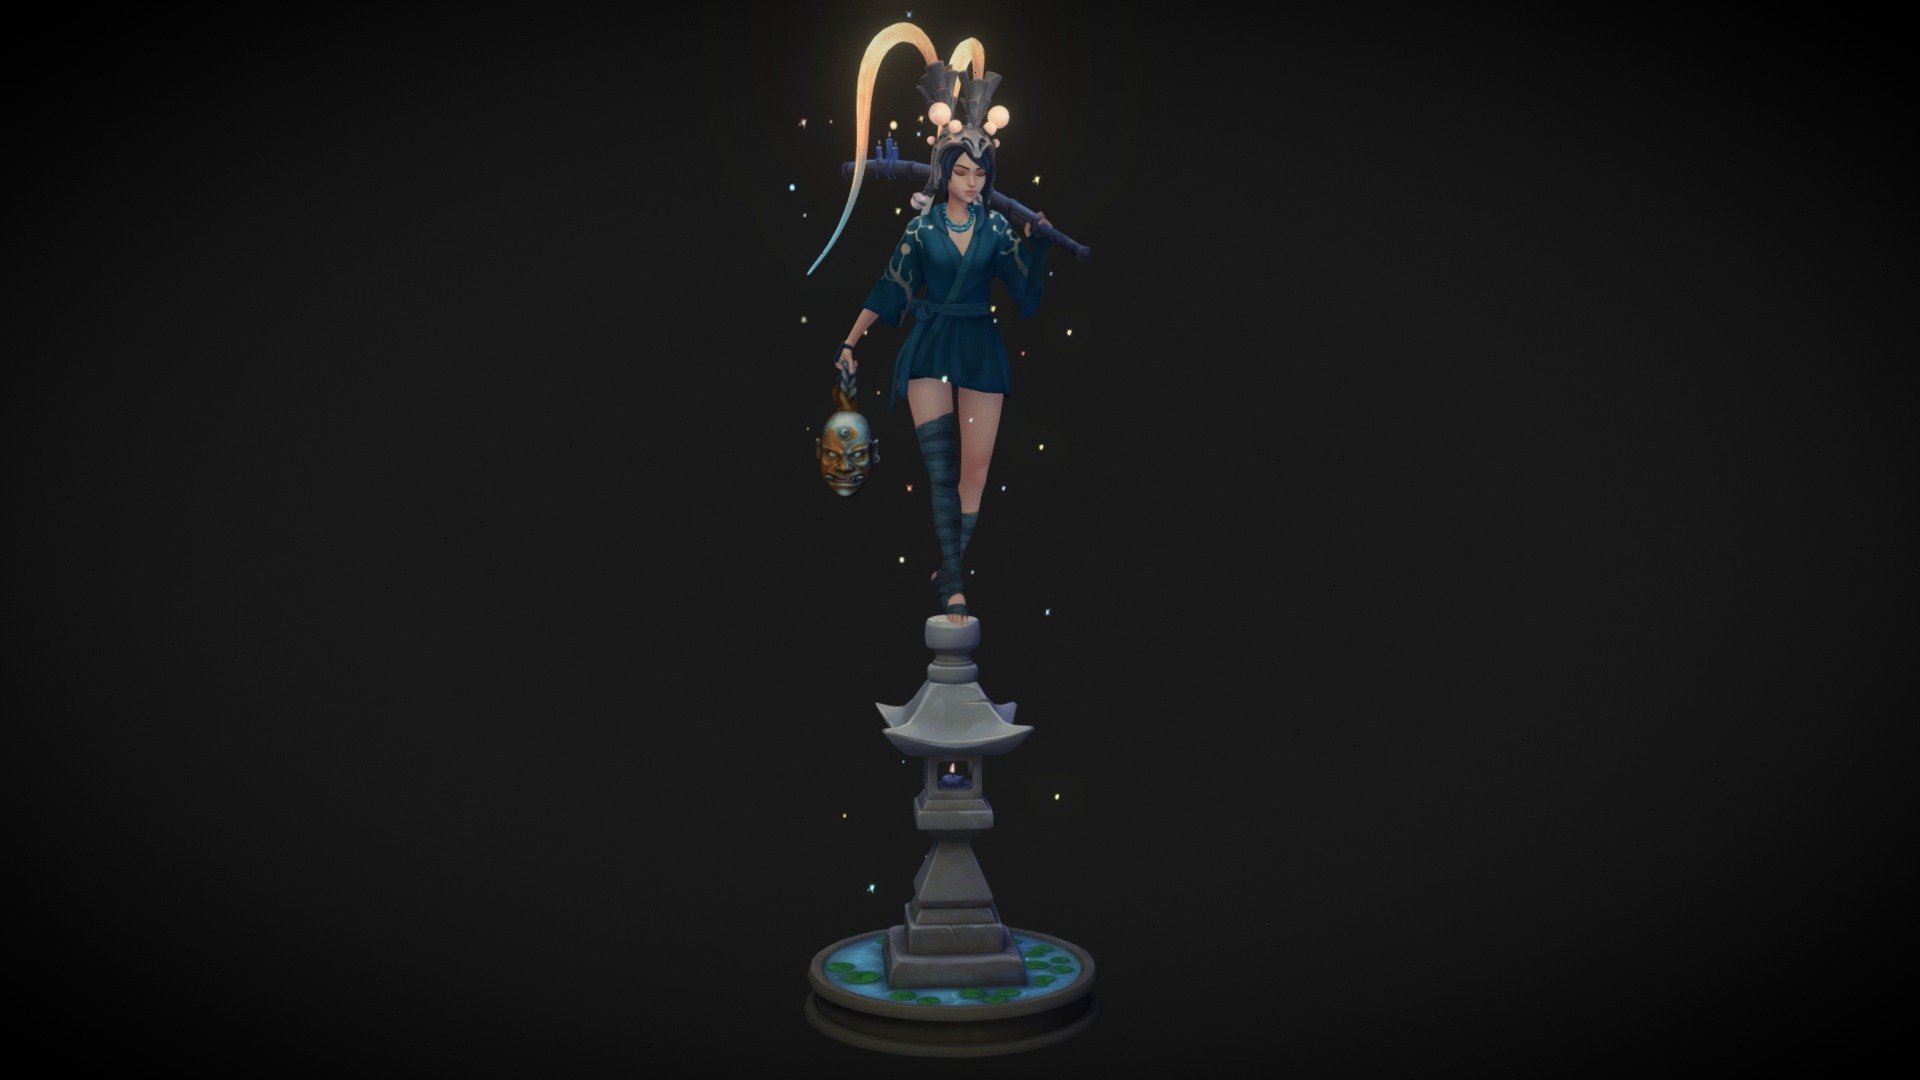 My portfolio: https://www.artstation.com/kleyco

Suanni is a fully hand-painted model with baked lights for a better presentation. Only with diffuse texture and a fire shader, it is based on the concepts from the talented Suke:

https://www.artstation.com/sukeart

Thanks to my friends Sara and Iranzu, I was able to showcase the model so beautifully with the rigging and animation they created:

Rigger's portfolio:
https://www.artstation.com/saraniso - Suanni - 3D model by kleyco 3d model